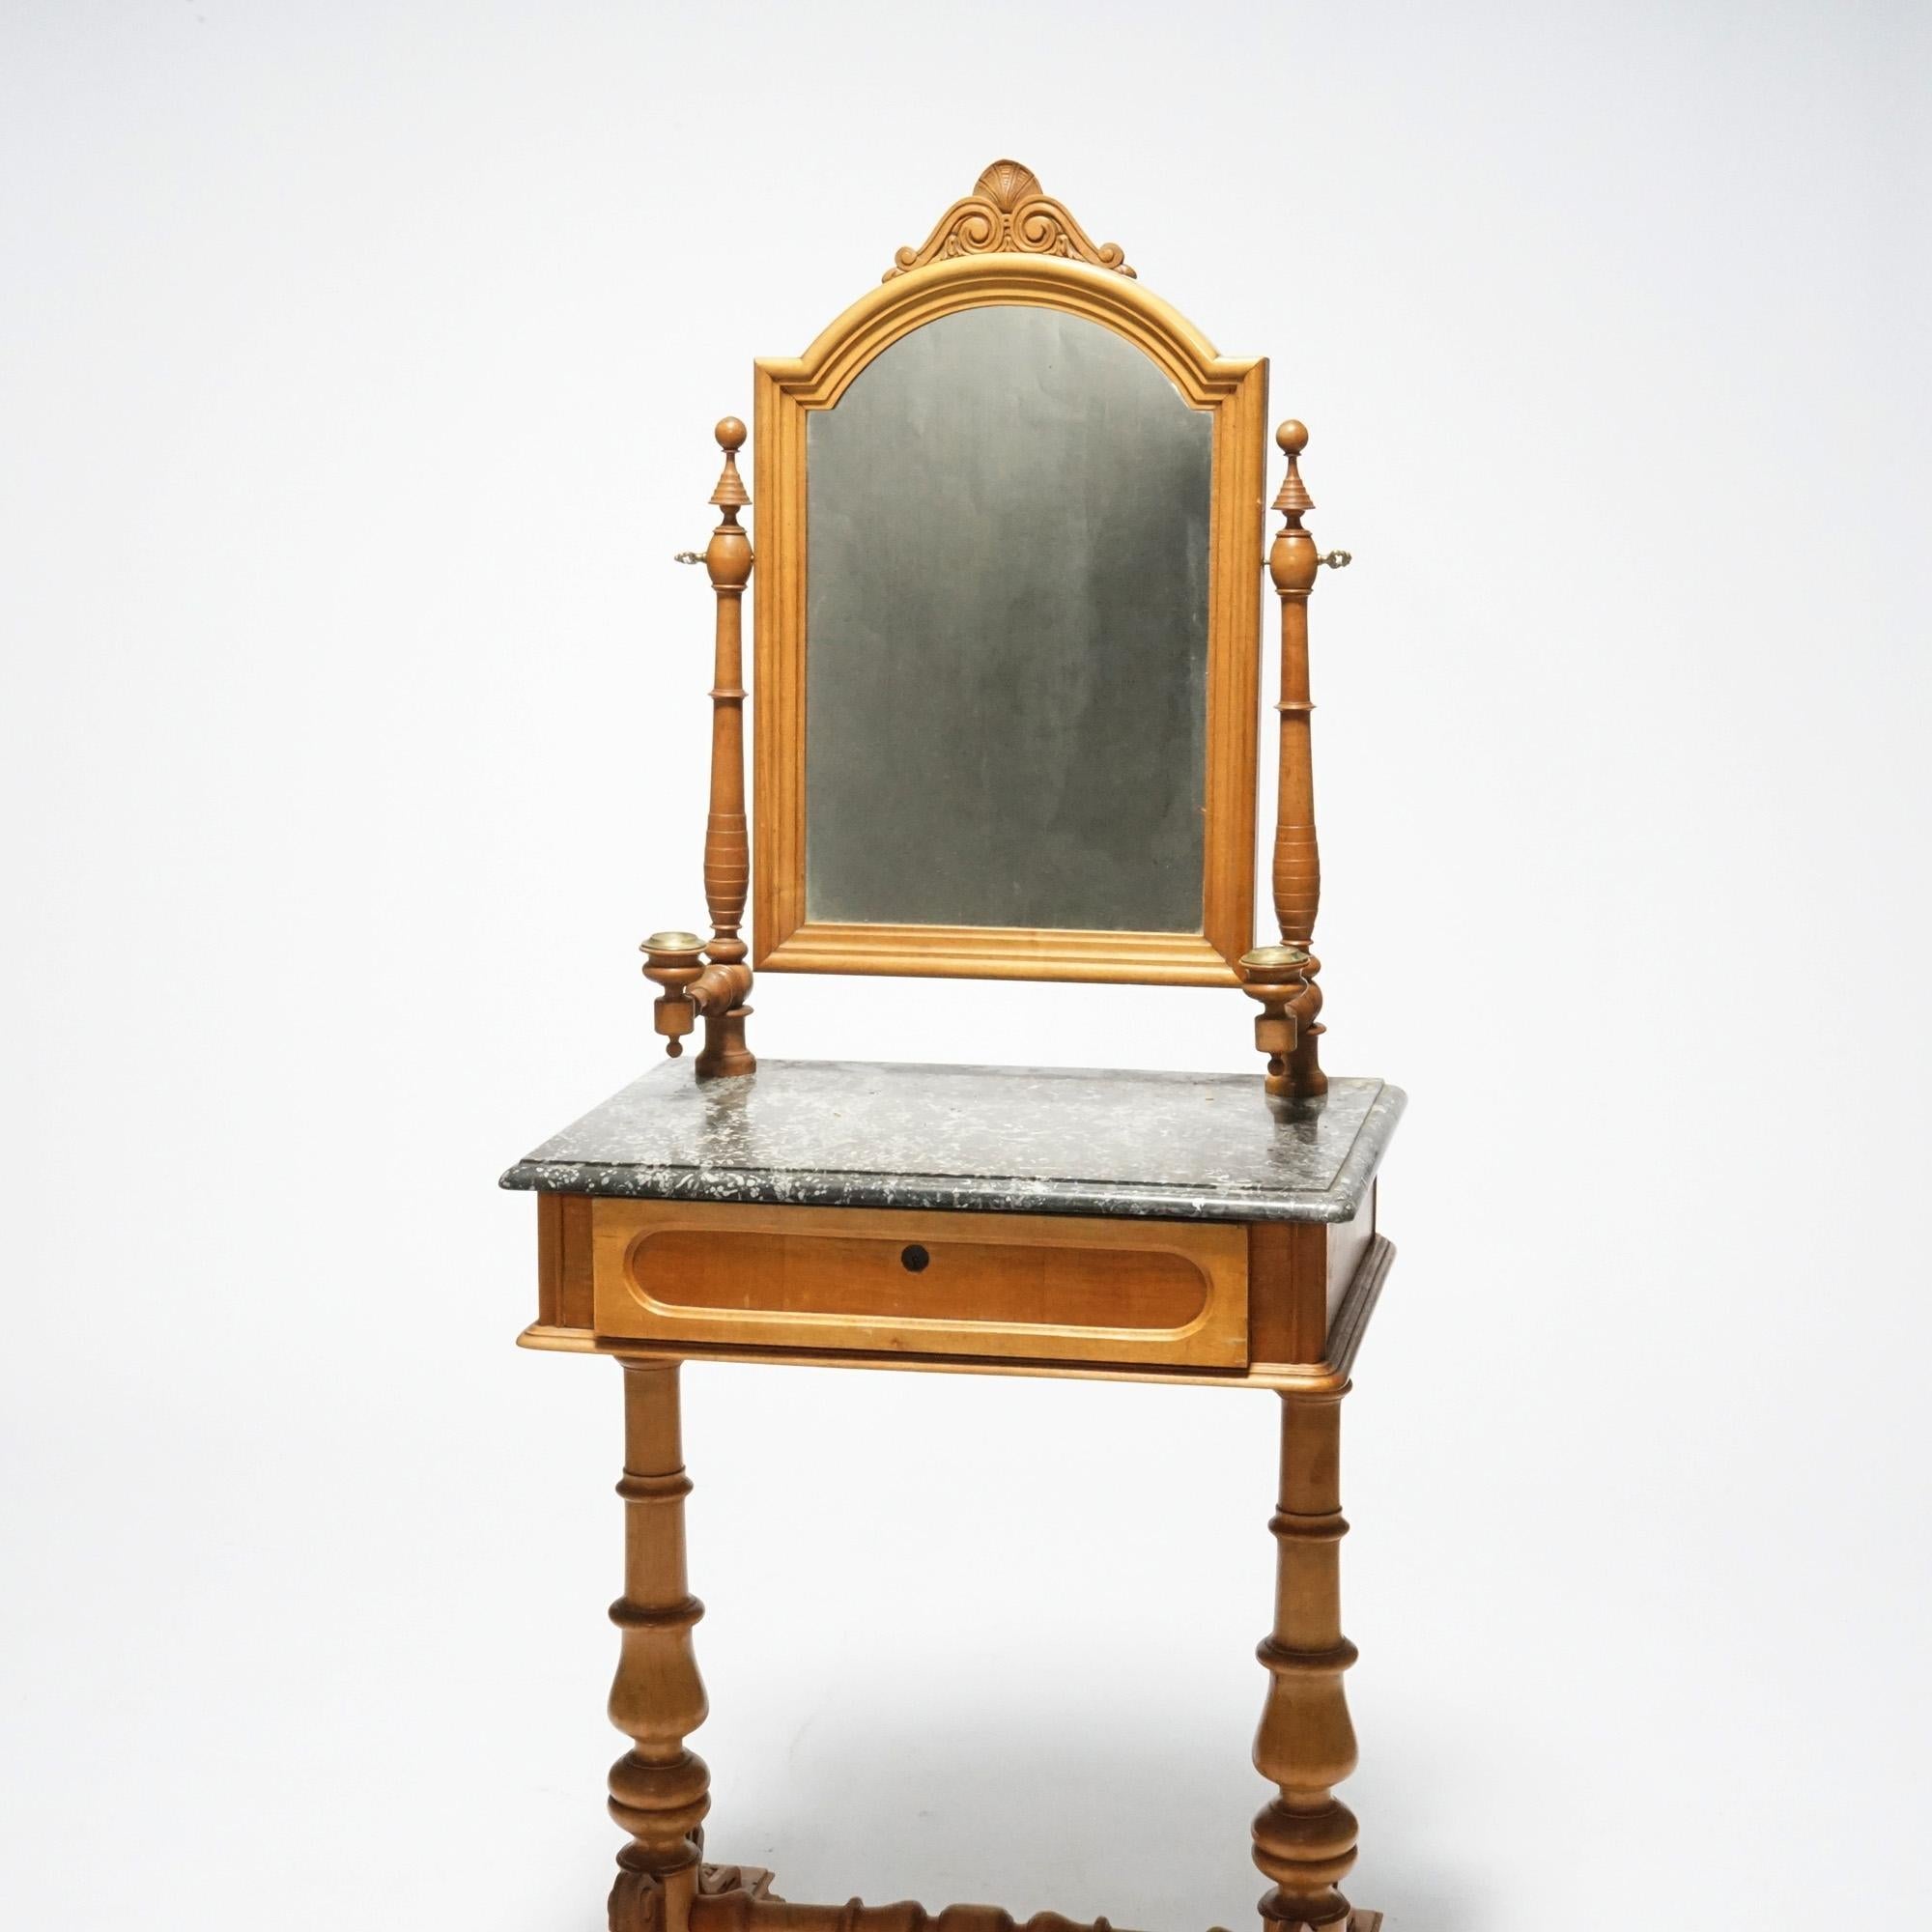 Carved Antique Walnut & Burl Marble Top Dressing Table, Mirror & Candle Stands, 19th C.